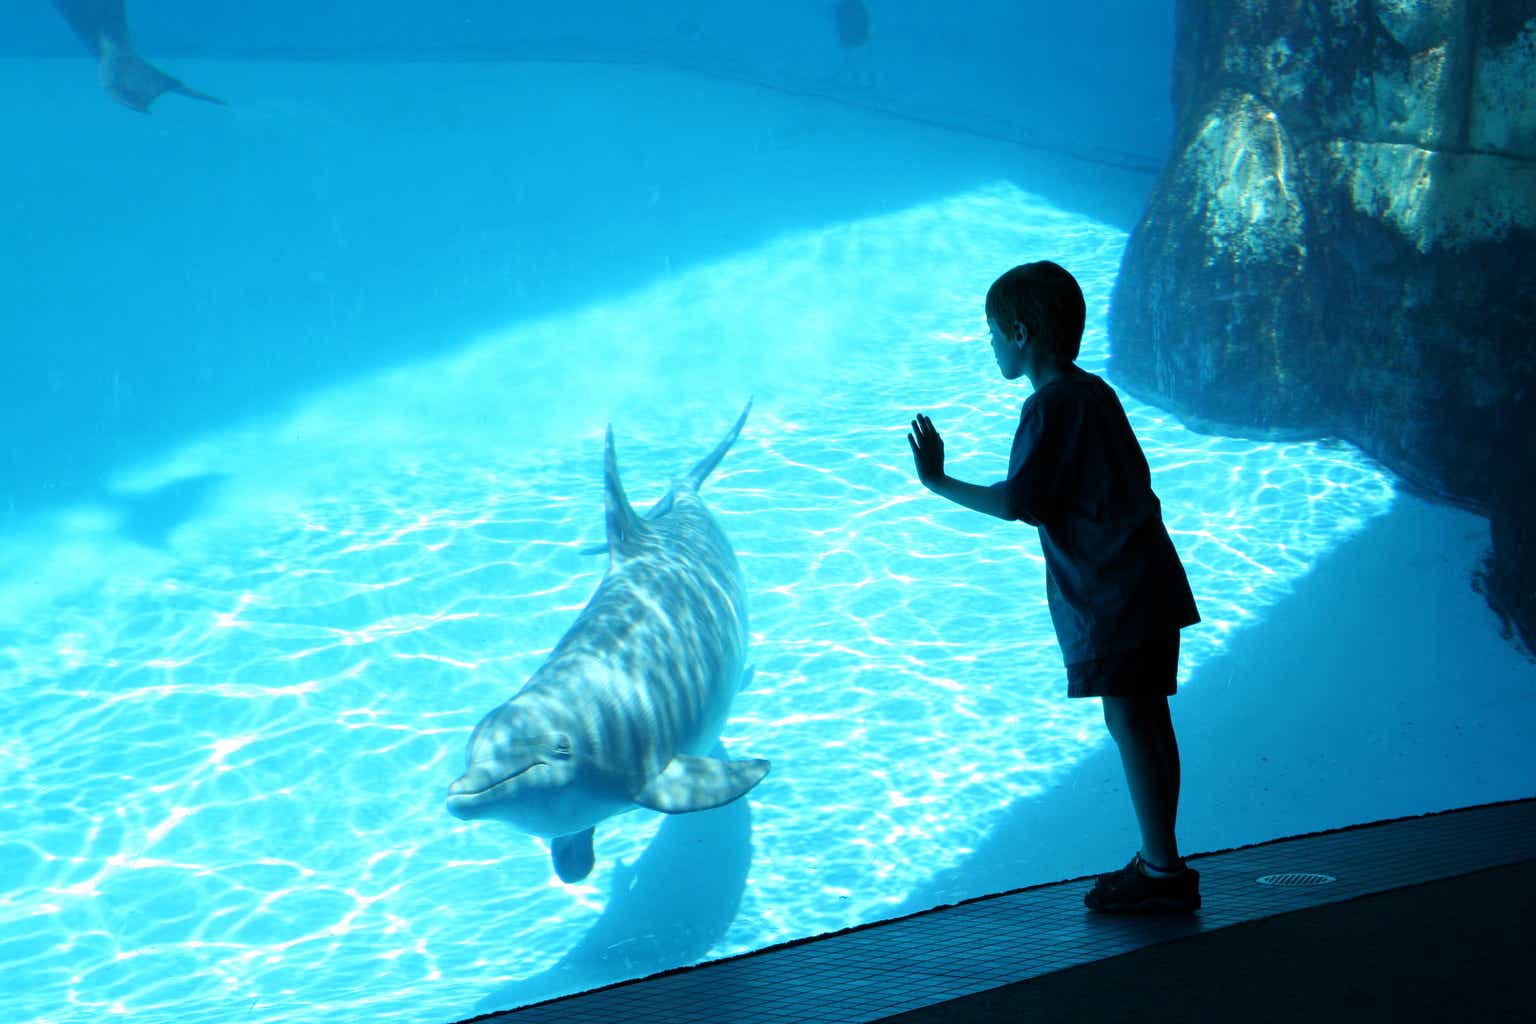 SeaWorld Entertainment: Gauging The Impact Of Inclement Weather, Remains A Buy Long Term